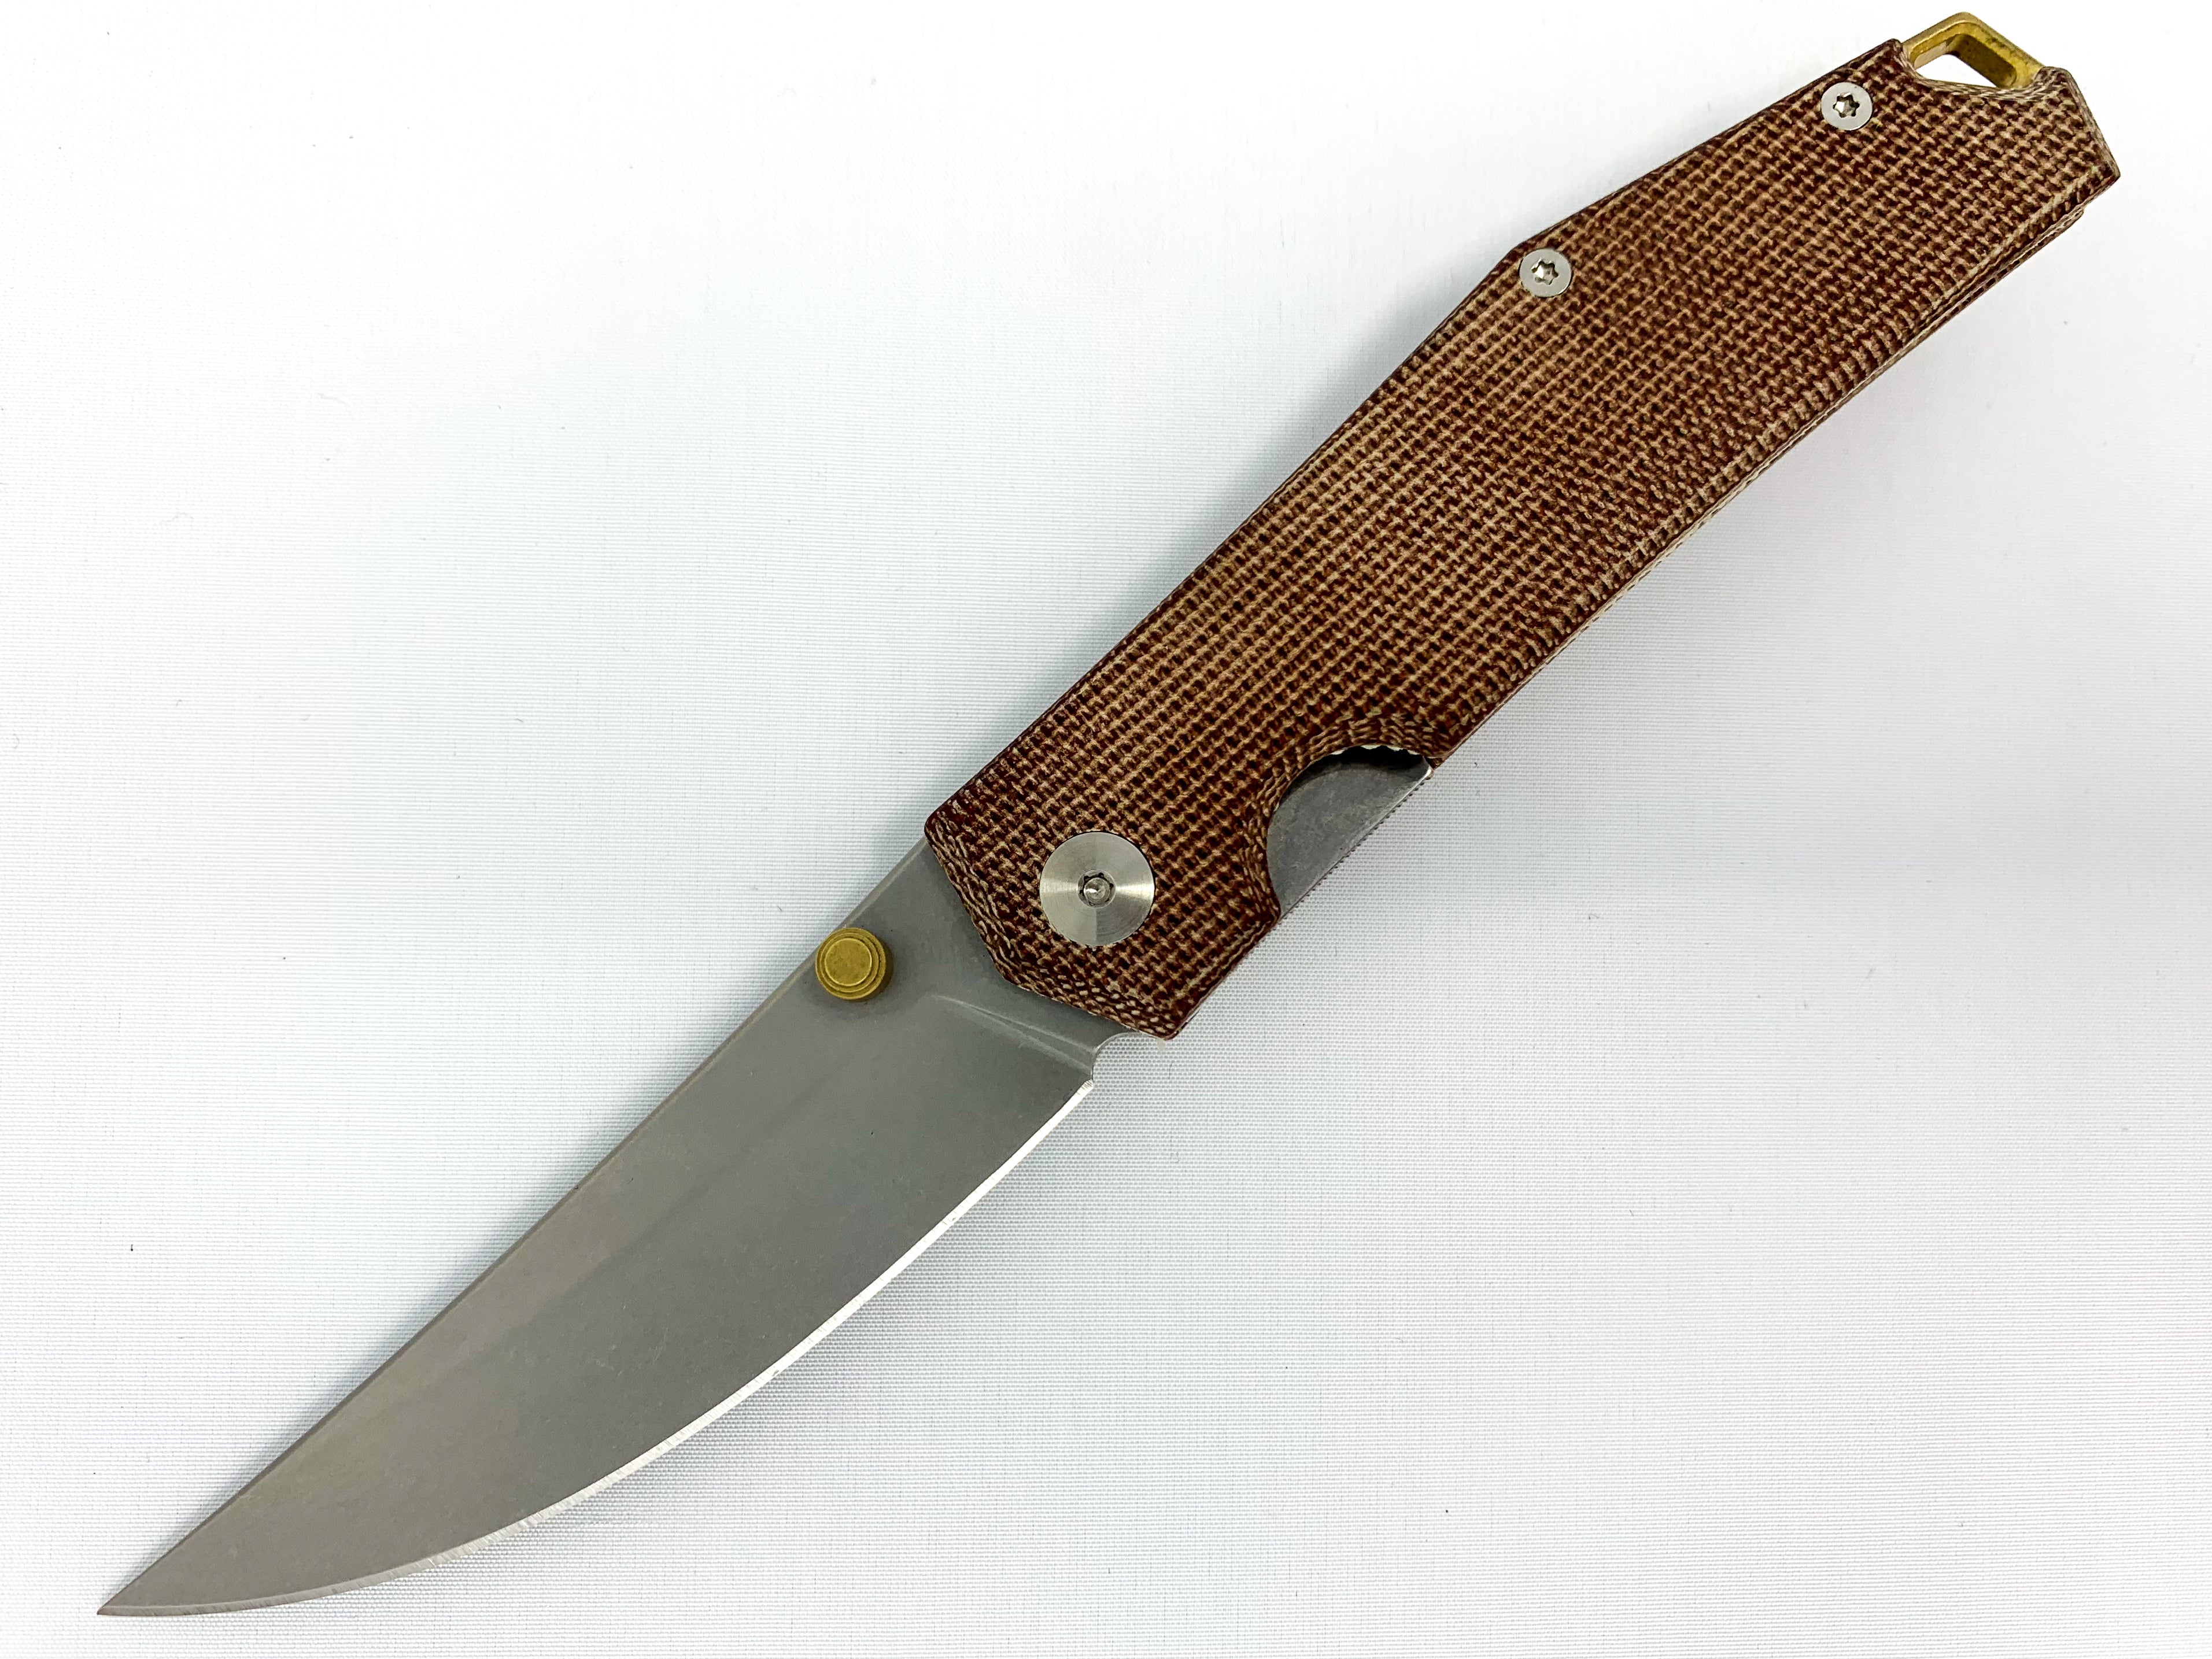 GiantMouse ACE Clyde - Natural Canvas Micarta - ELMAX - Brass Thumbstud and Backspacer